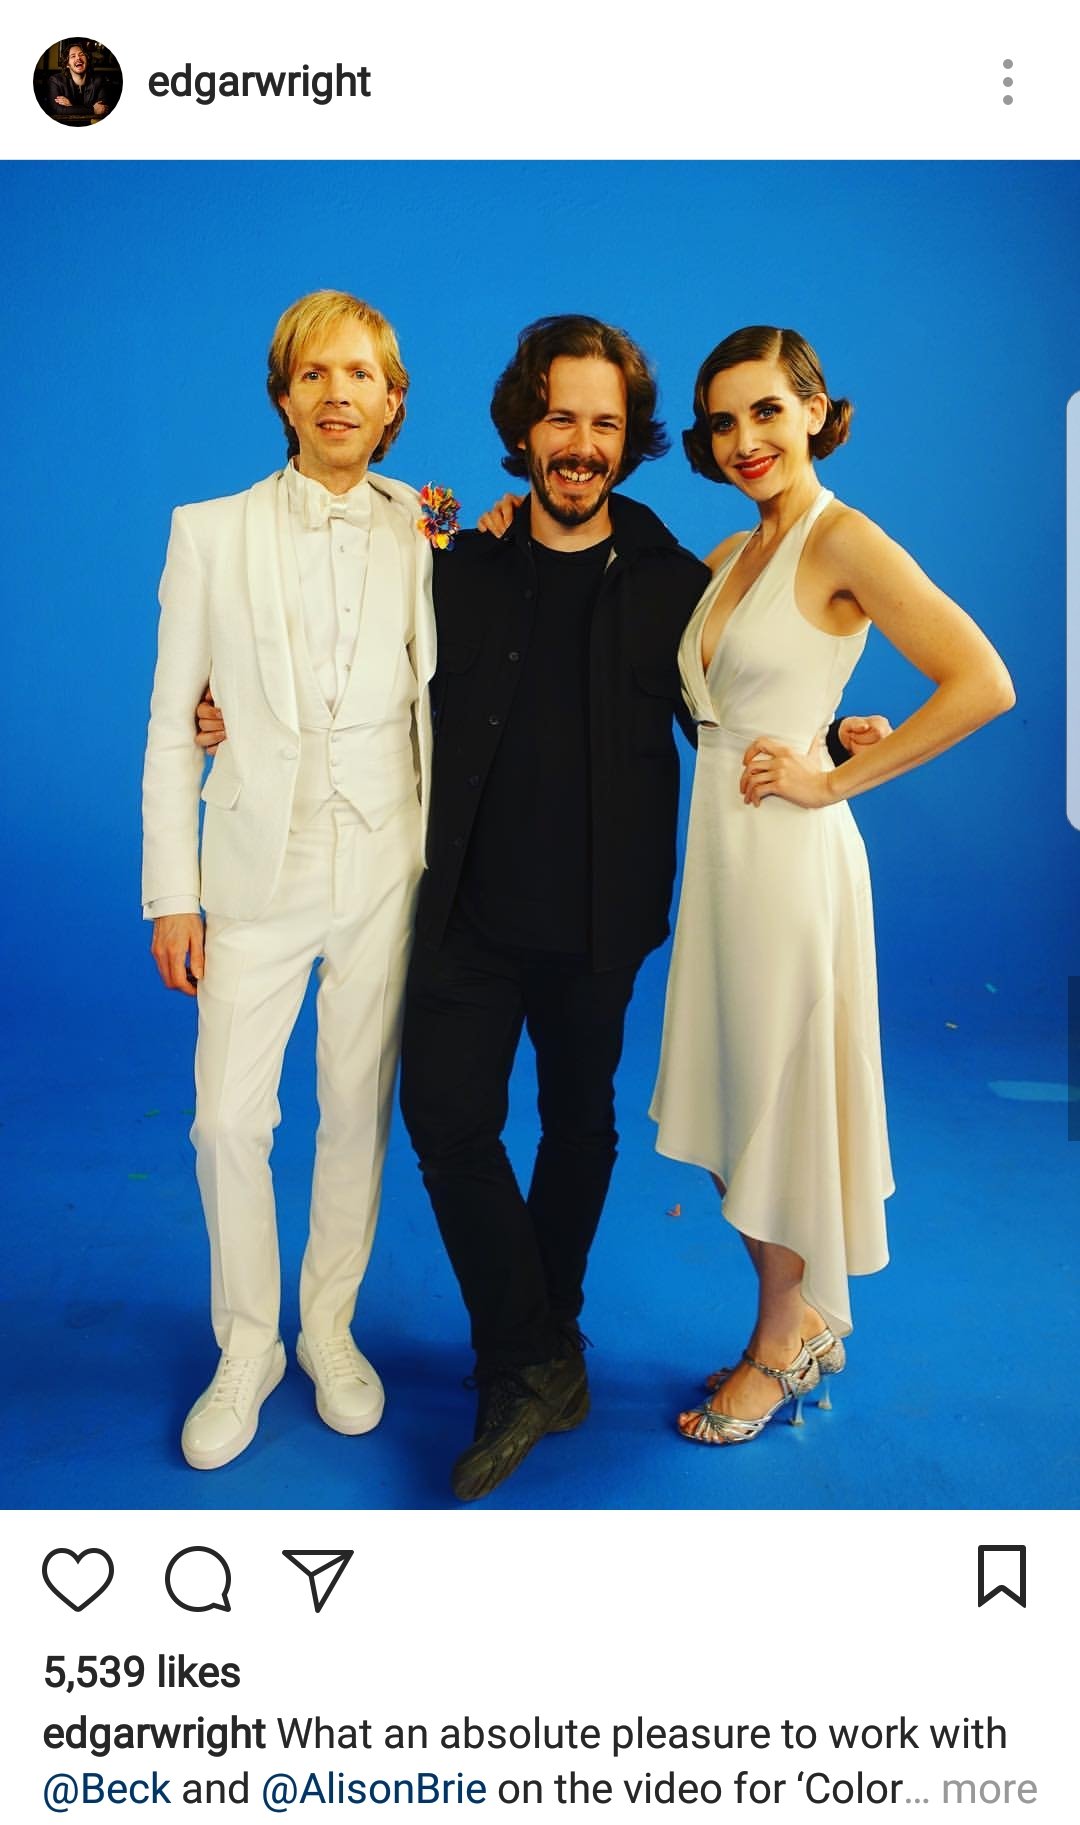 hover hand alison brie colors - edgarwright oo 5,539 edgarwright What an absolute pleasure to work with and on the video for Color... more